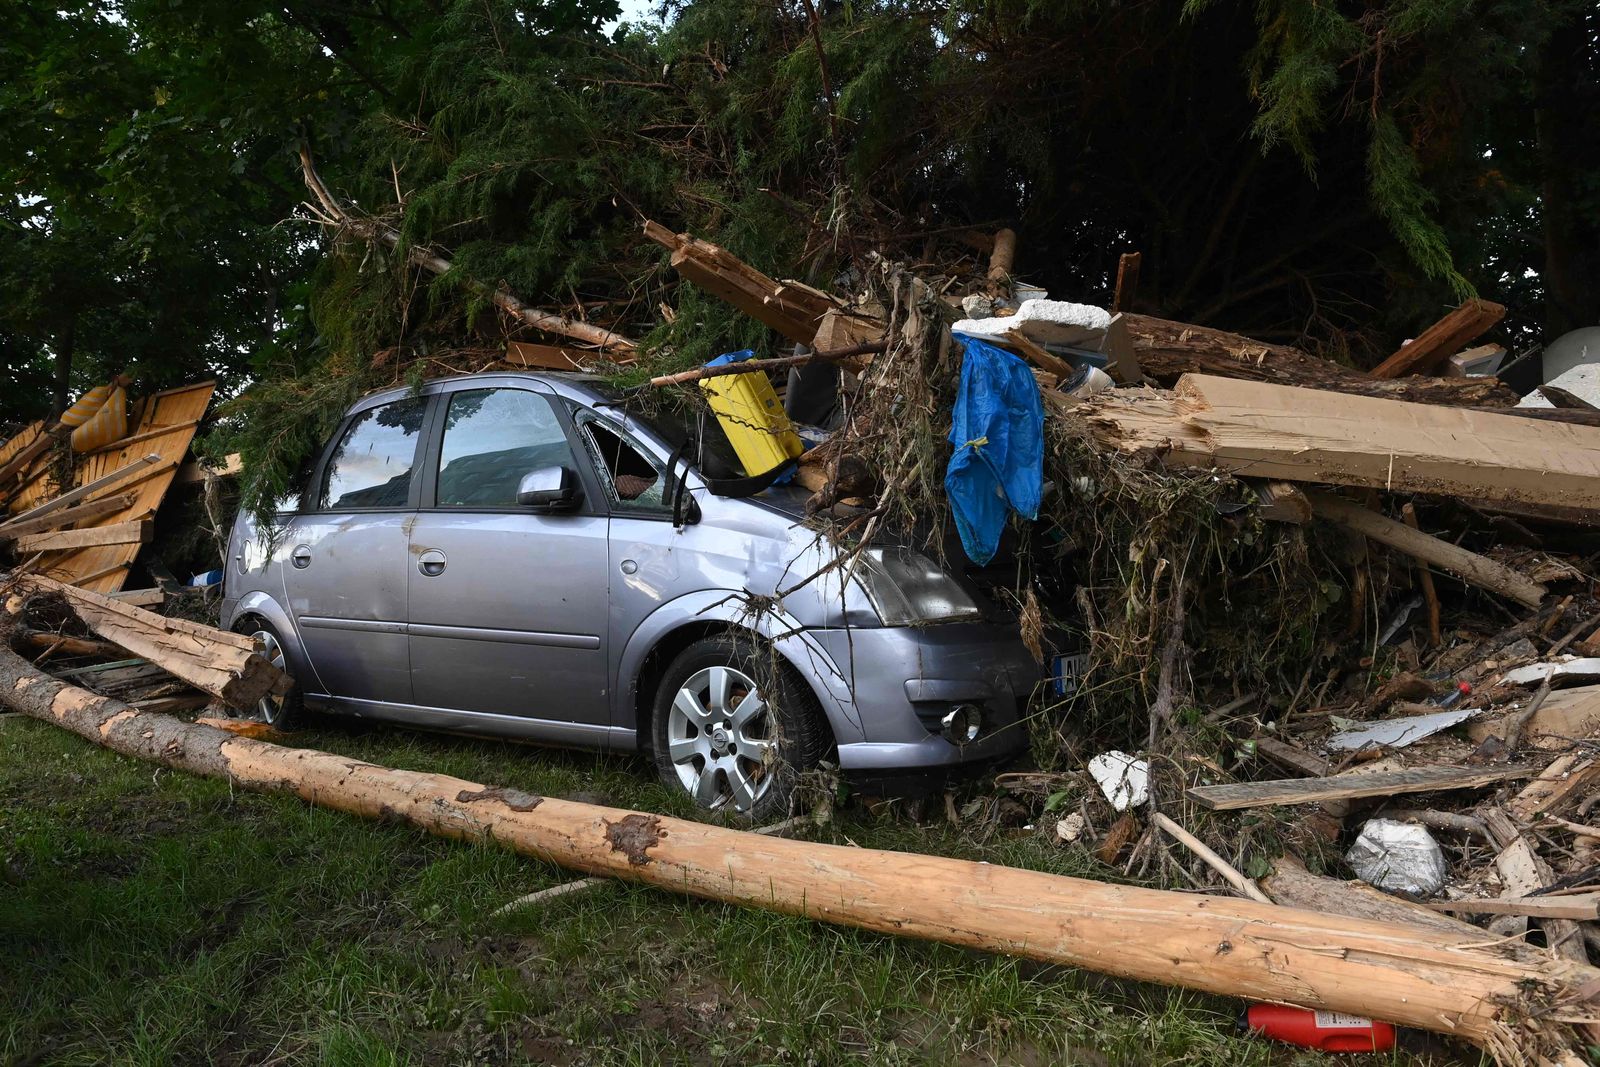 A damaged car can be seen under torn trees and debris in Bad Neuenahr-Ahrweiler, western Germany, on July 17, 2021. - Devastating floods in Germany and other parts of western Europe have been described as a 